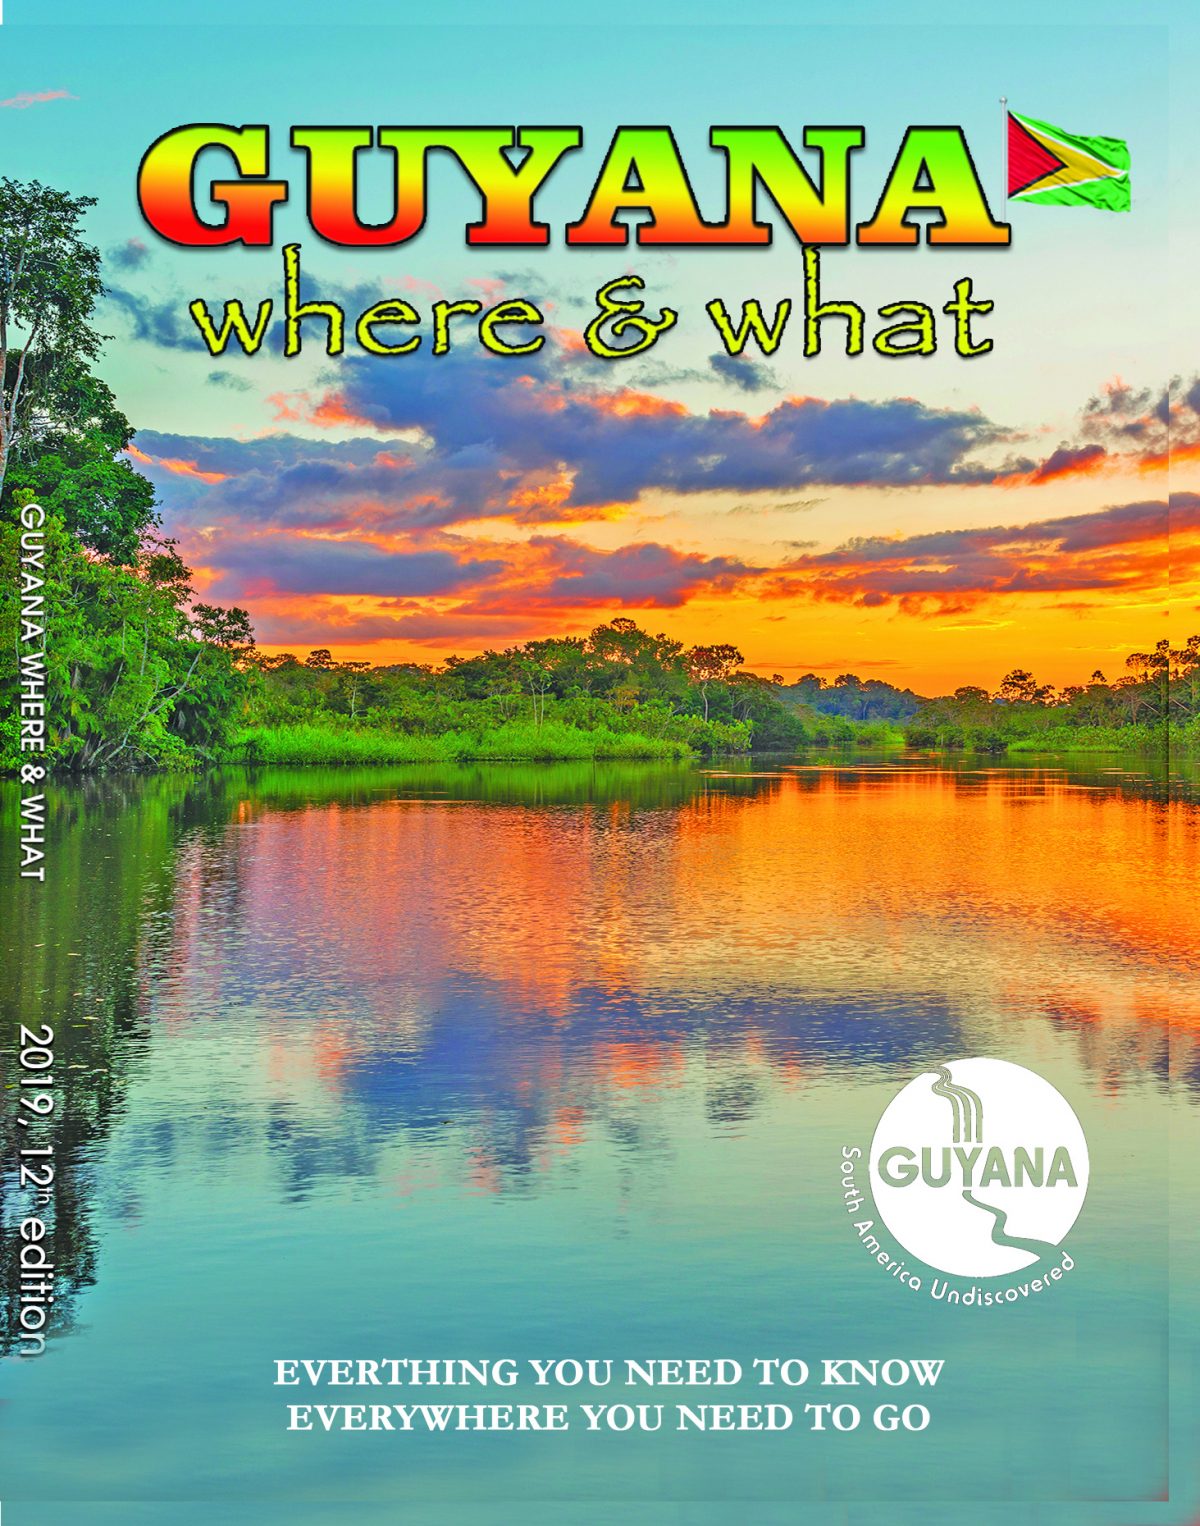 The cover of the tourist guide